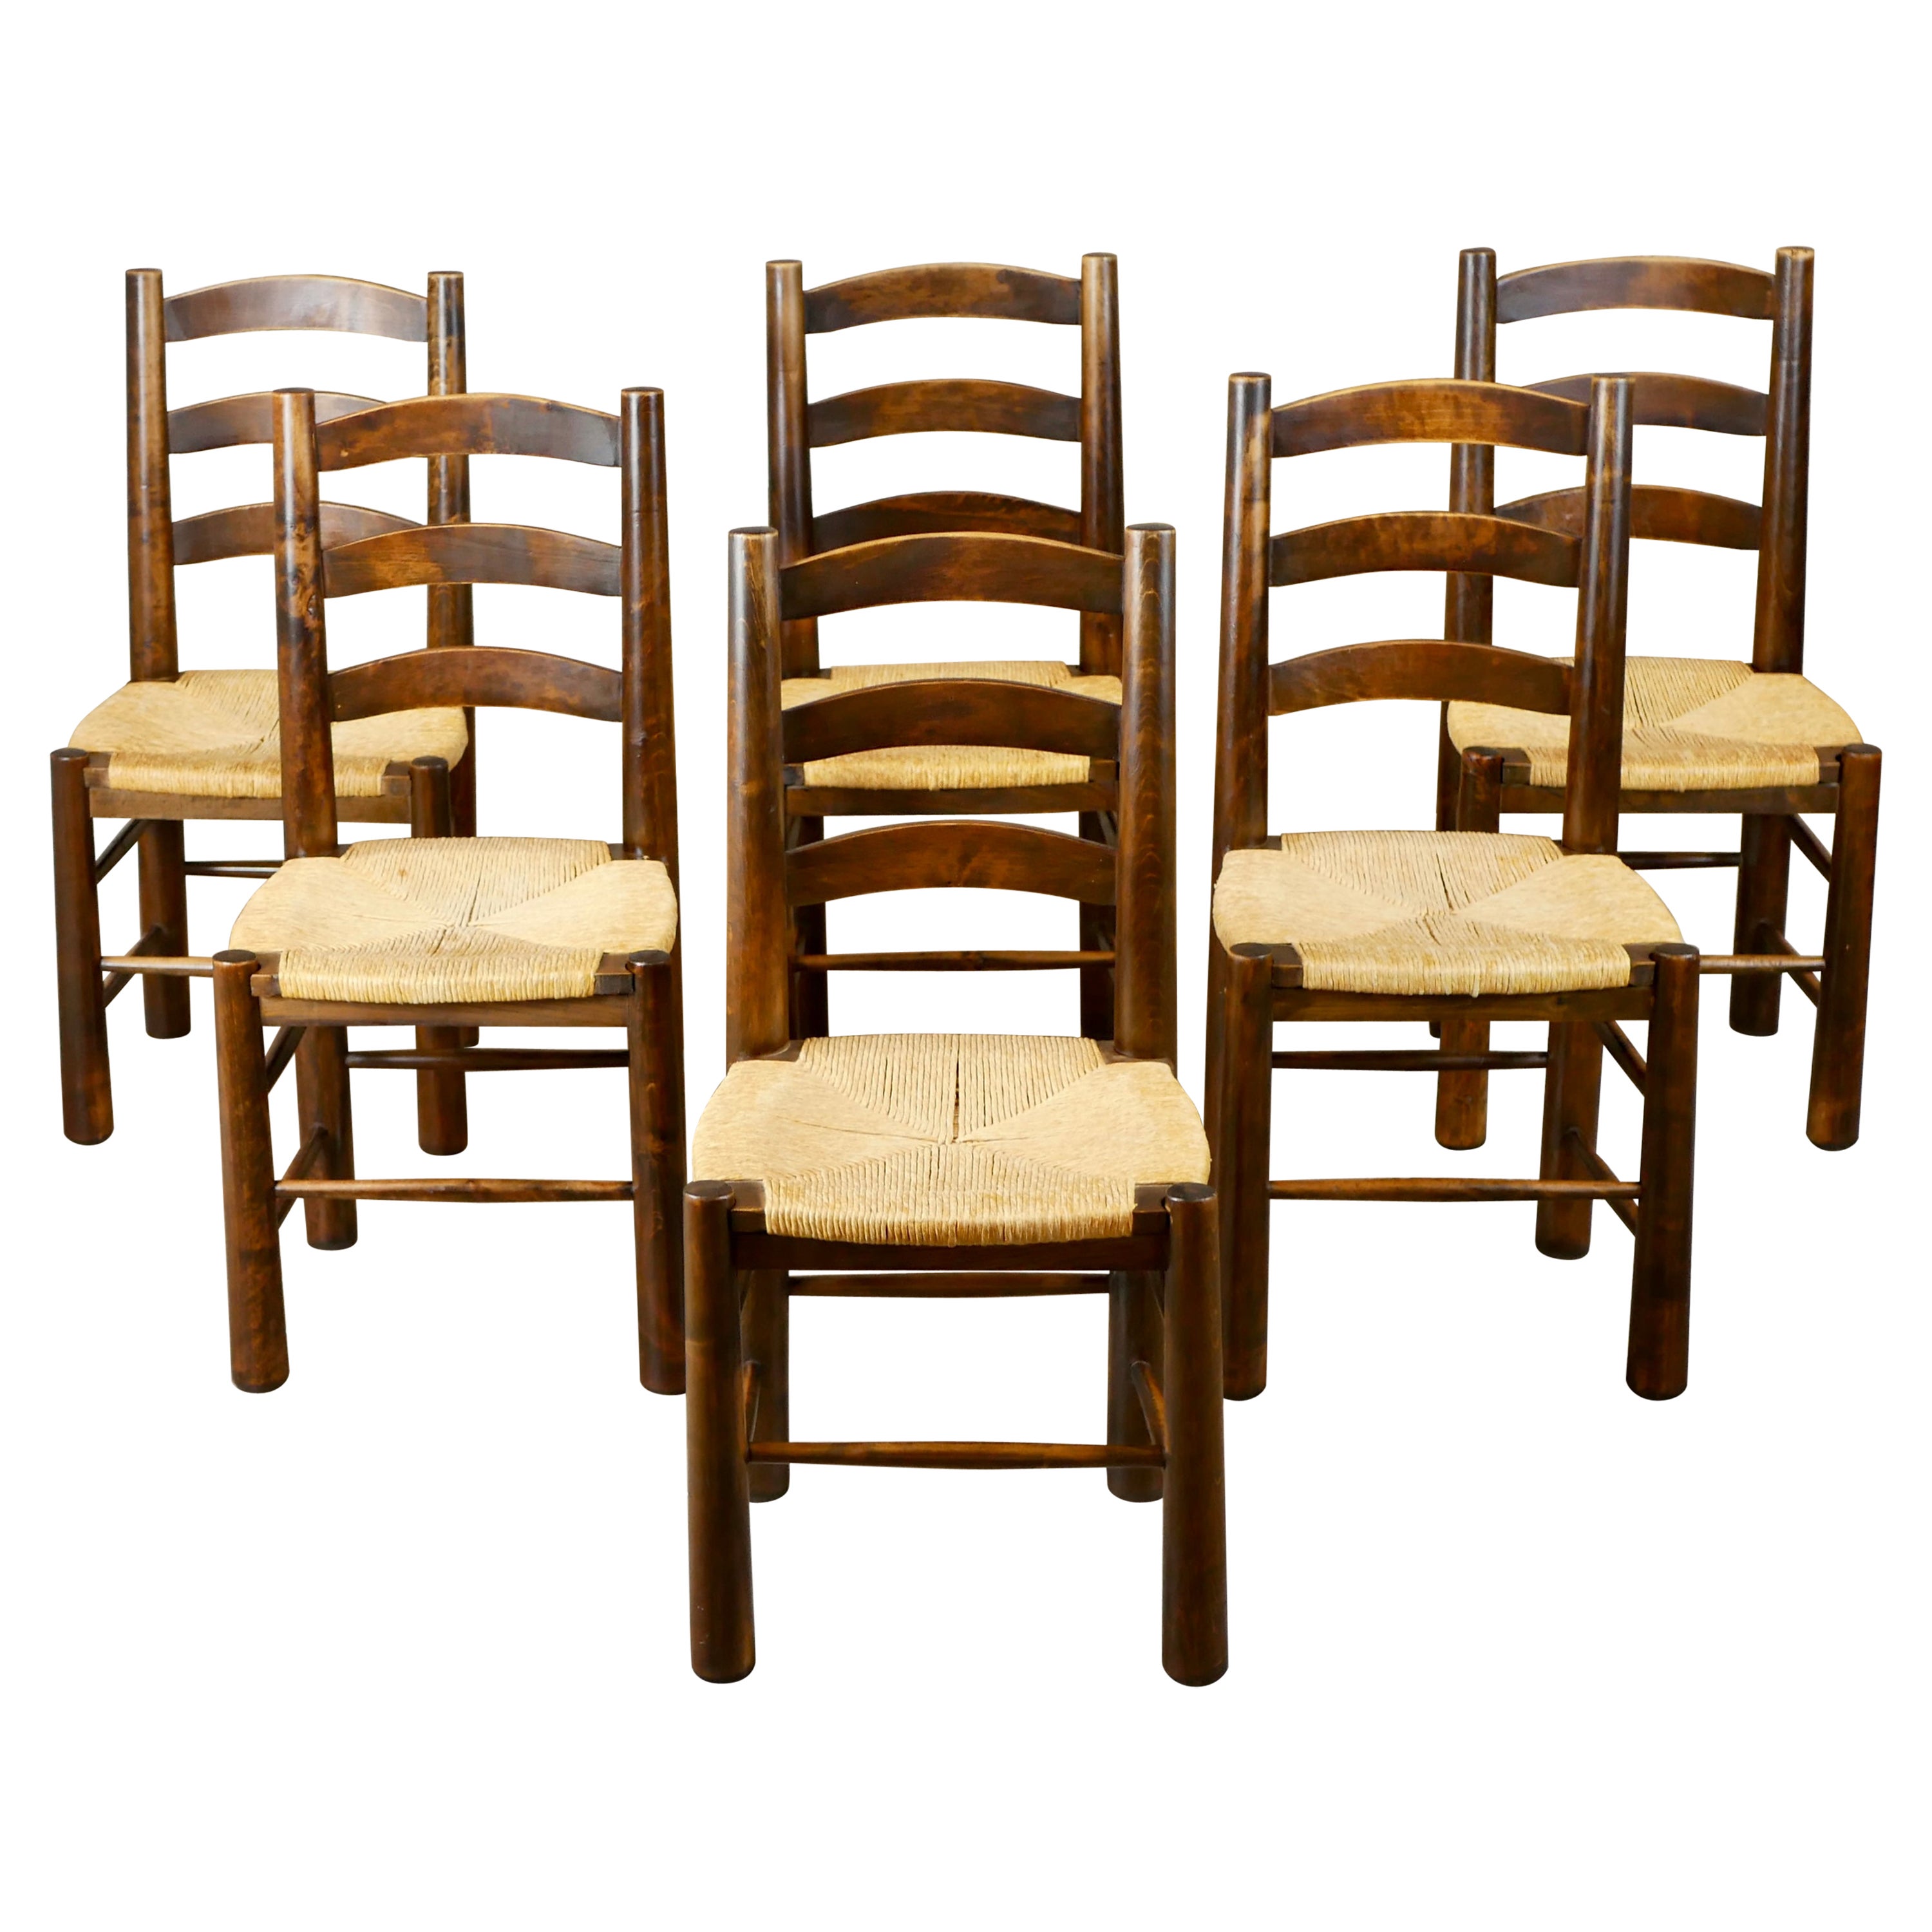 Set of 6 Georges Robert wood and straw chairs, made in France, 1950s For Sale